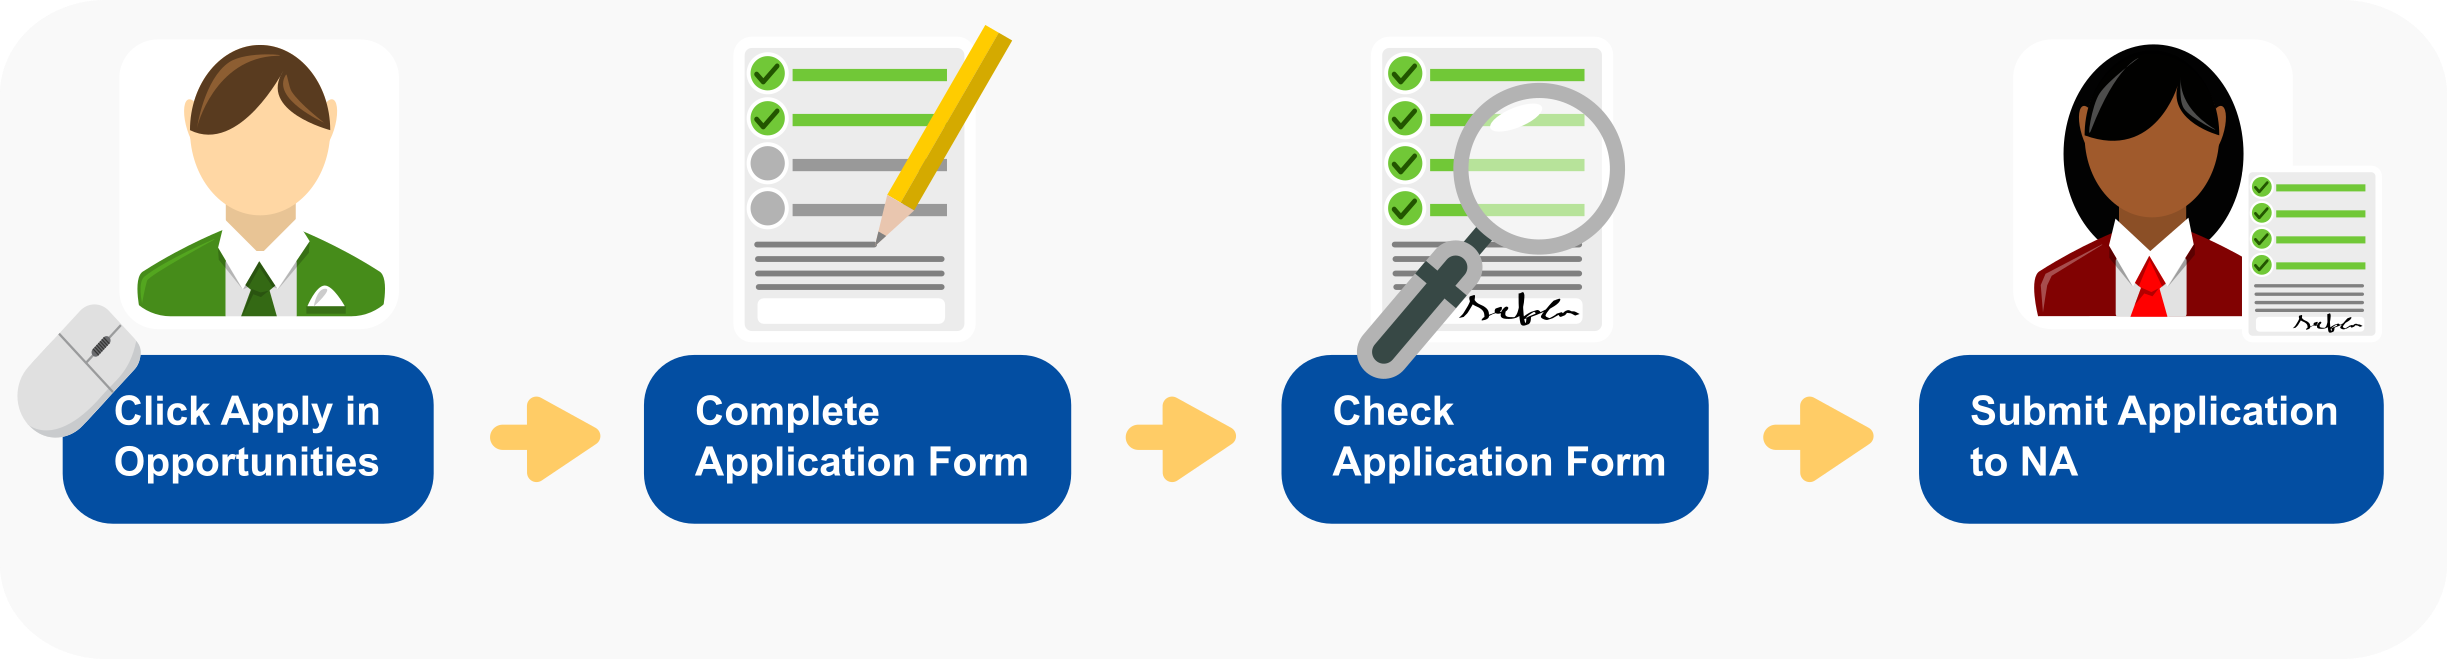 How to complete the application form